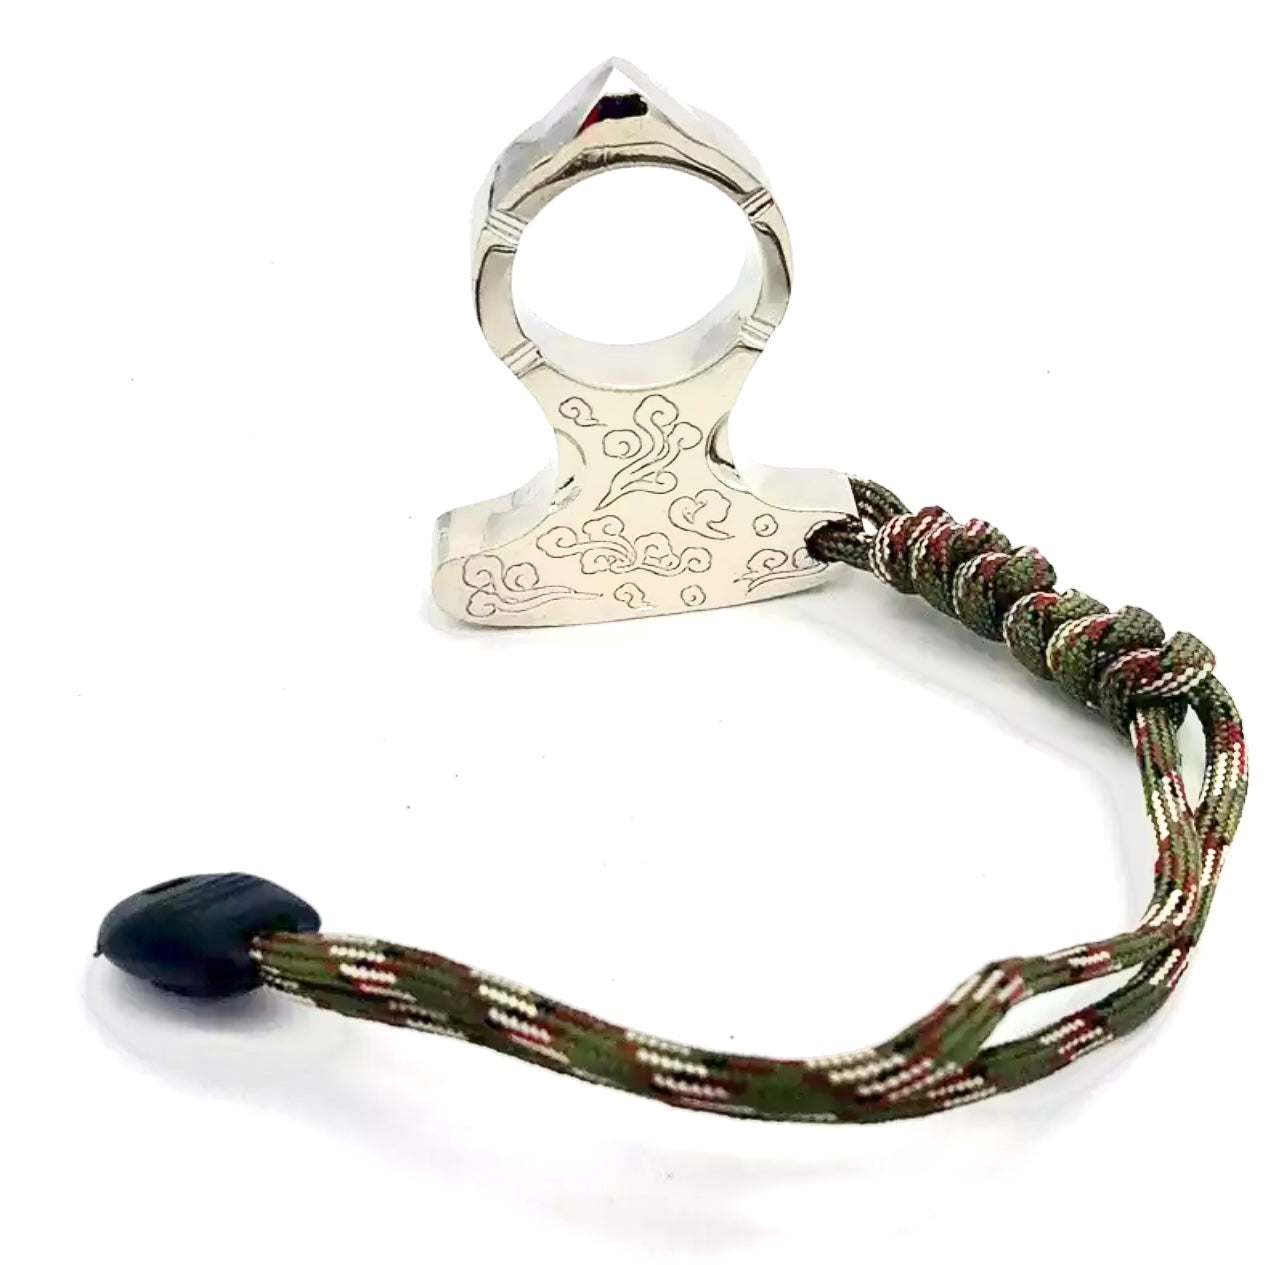 Create Your Own Paracord Survival Steel Key Chain